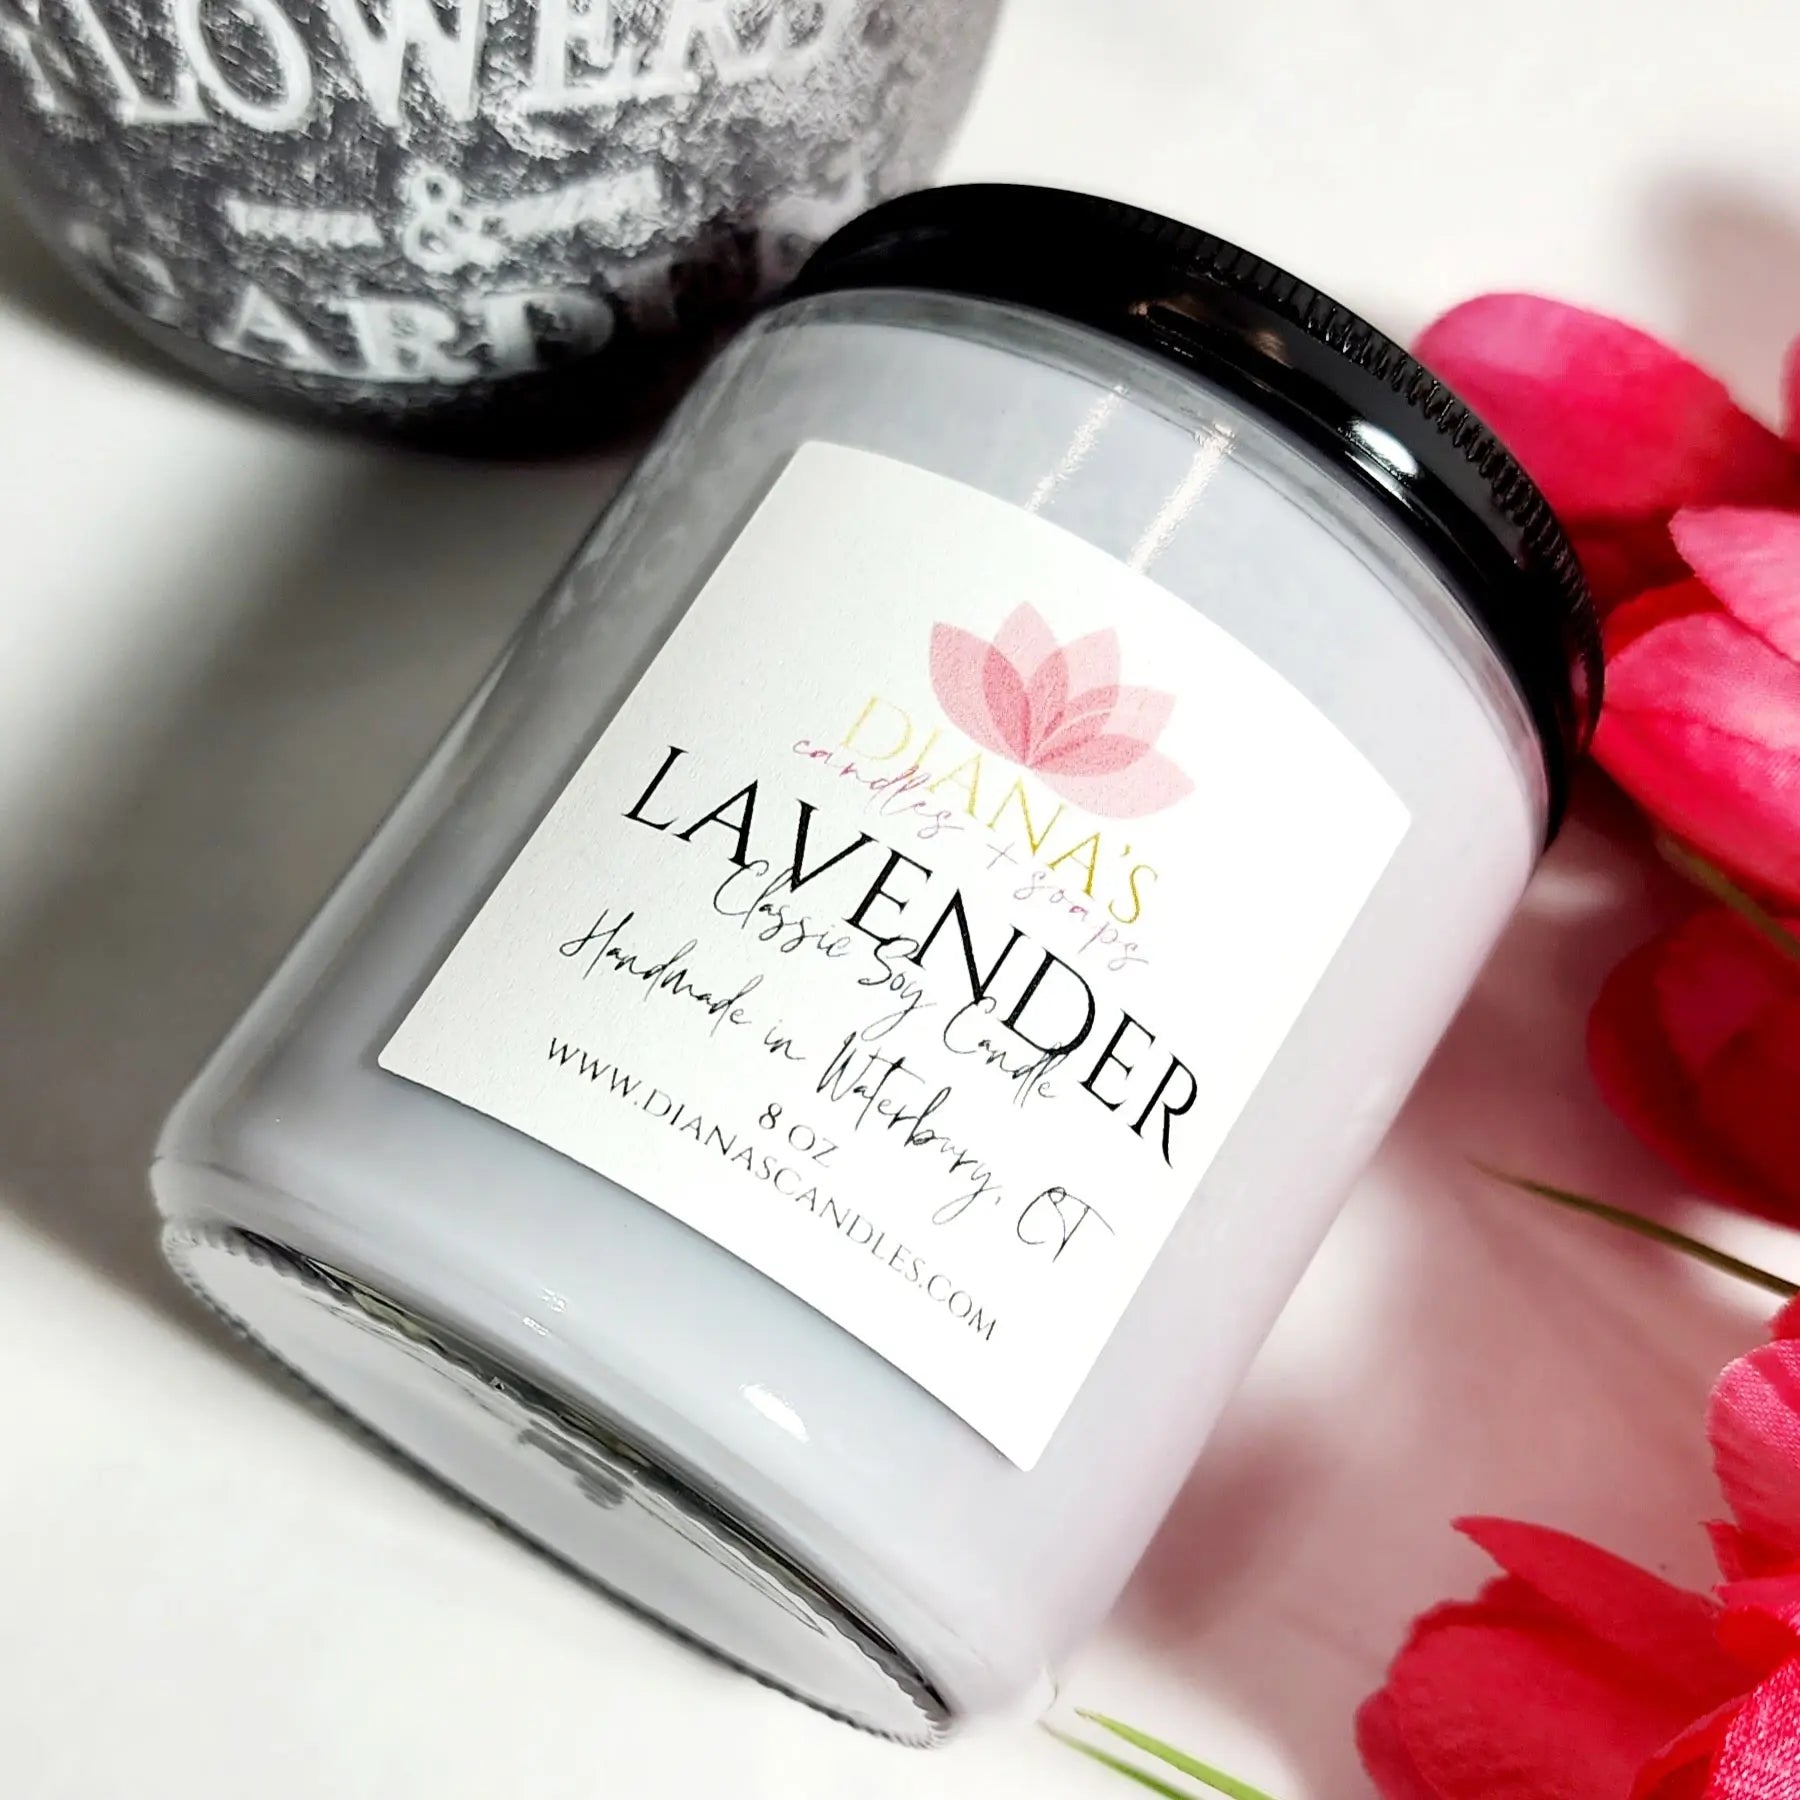 Lavender Candle - Diana's Candles and Soaps 